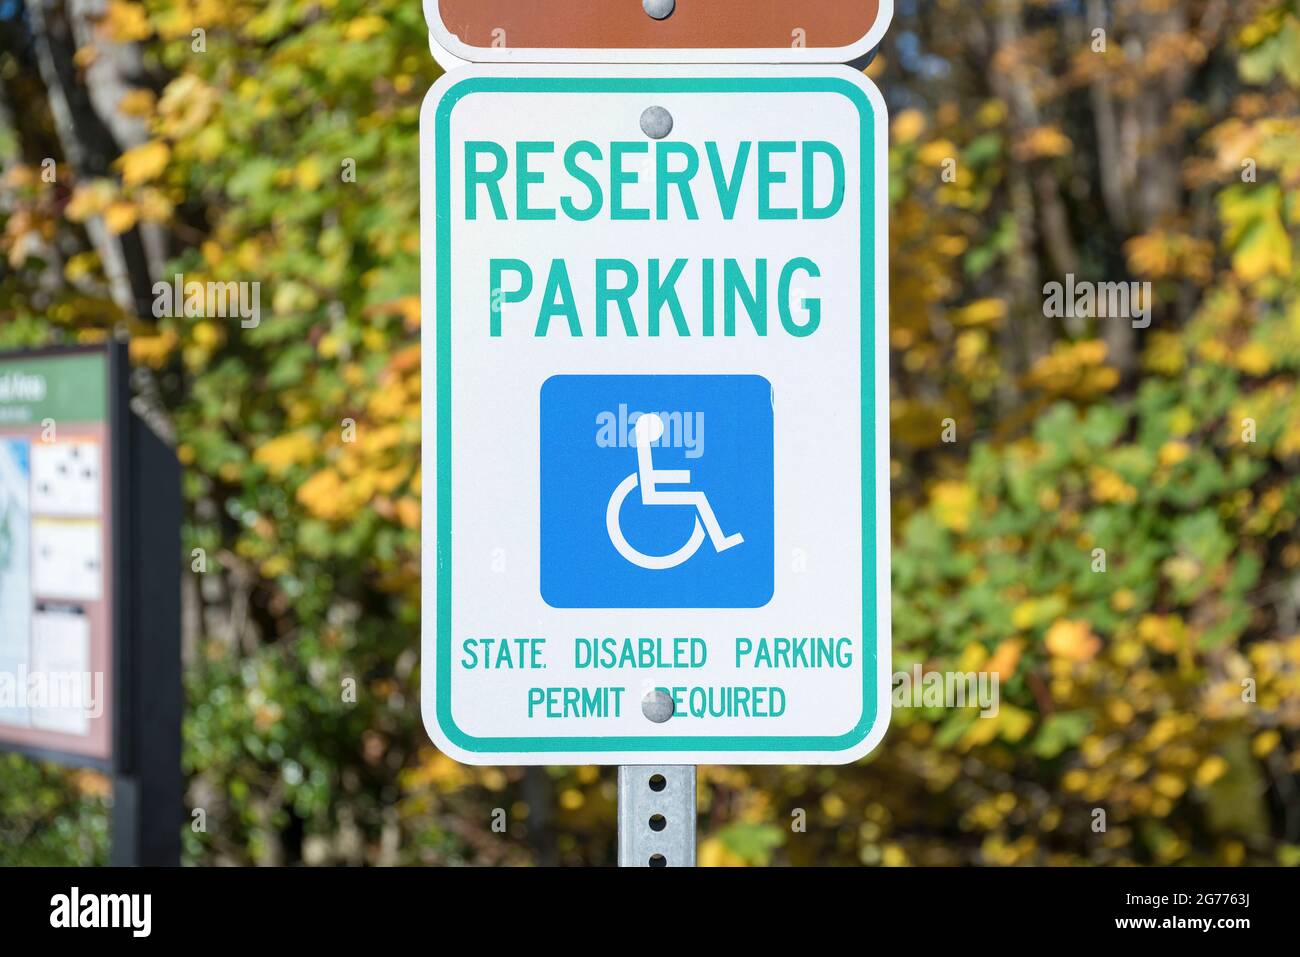 Reserved parking for a person with disability signage on a metal post at Tacoma in Washington Stock Photo